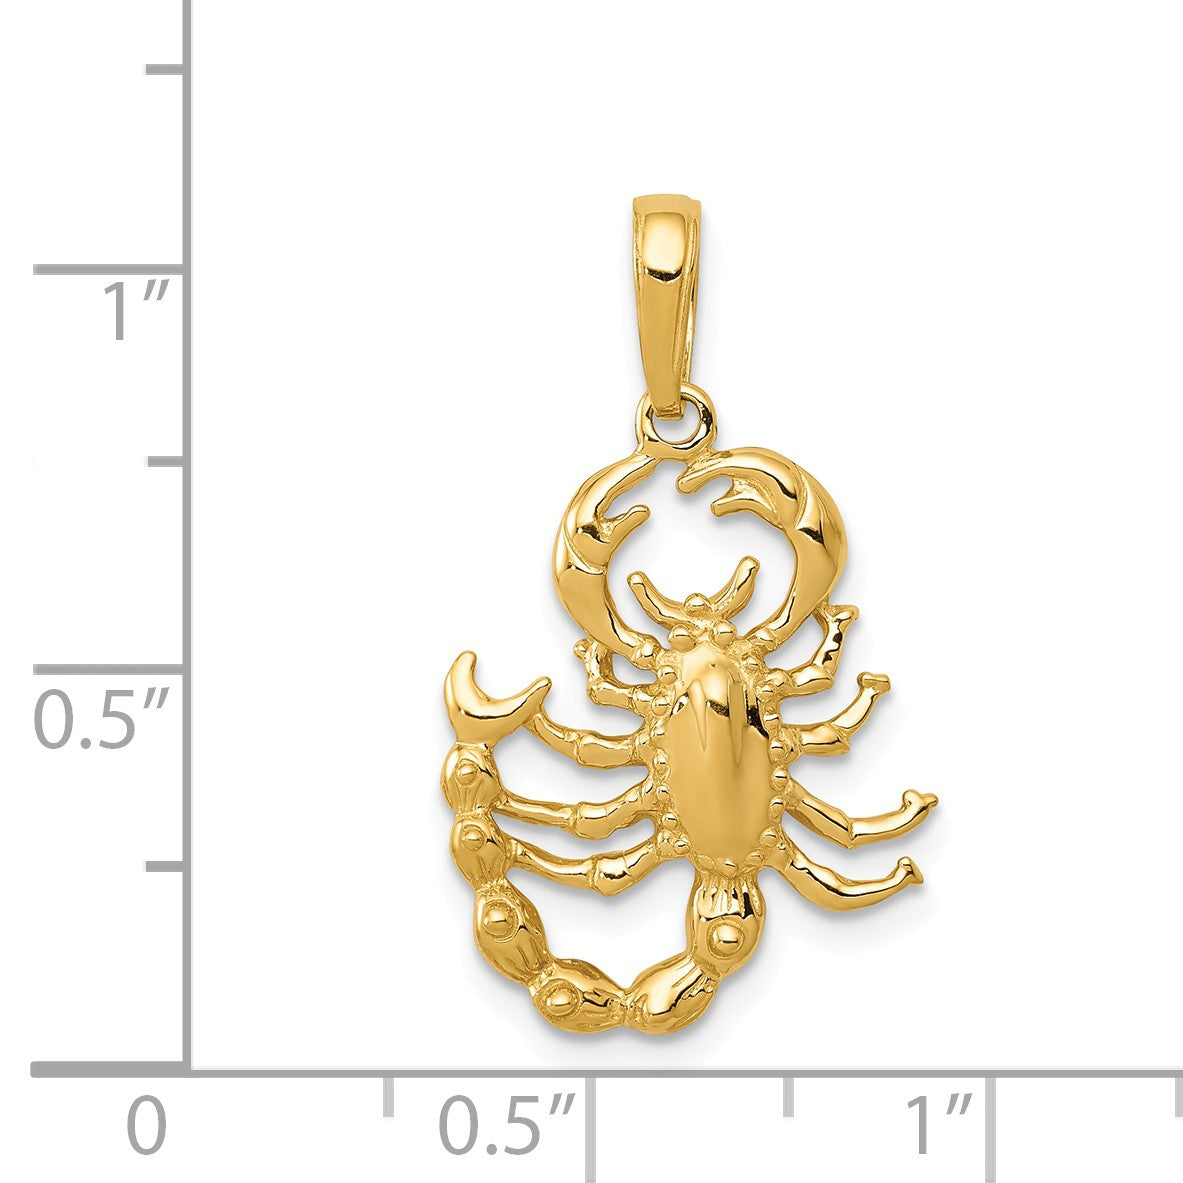 Alternate view of the 14k Yellow Gold Polished Scorpion Pendant by The Black Bow Jewelry Co.